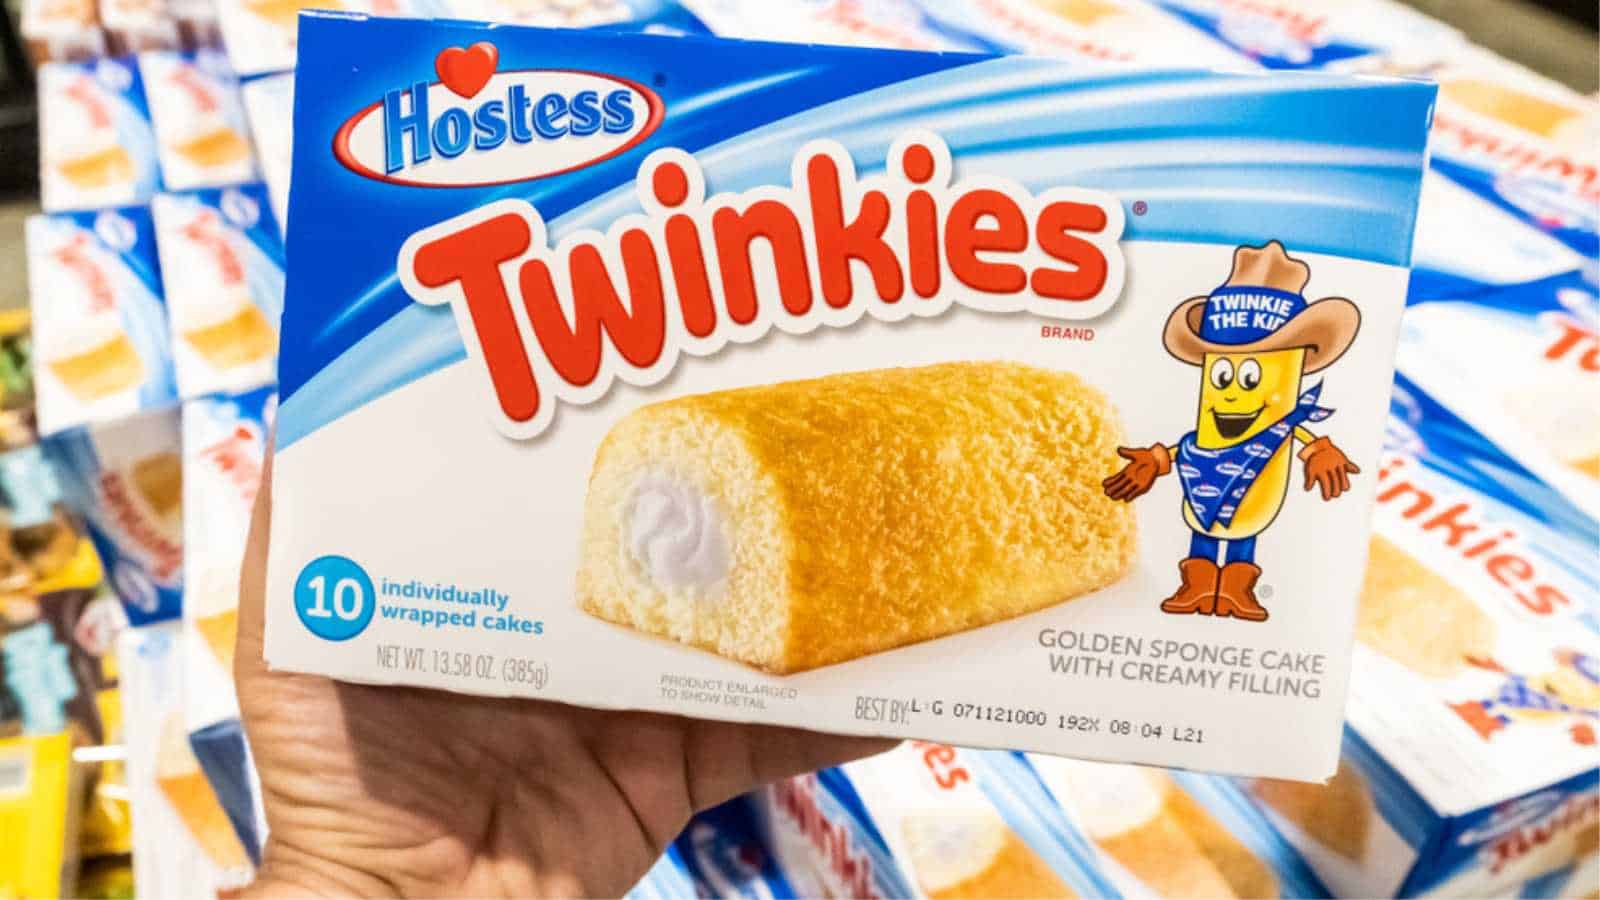 Los Angeles, CA/USA 08/20/2019 Shoppers hand holding a package of Twinkies brand golden sponge cakes with creamy filling in a supermarket aisle
